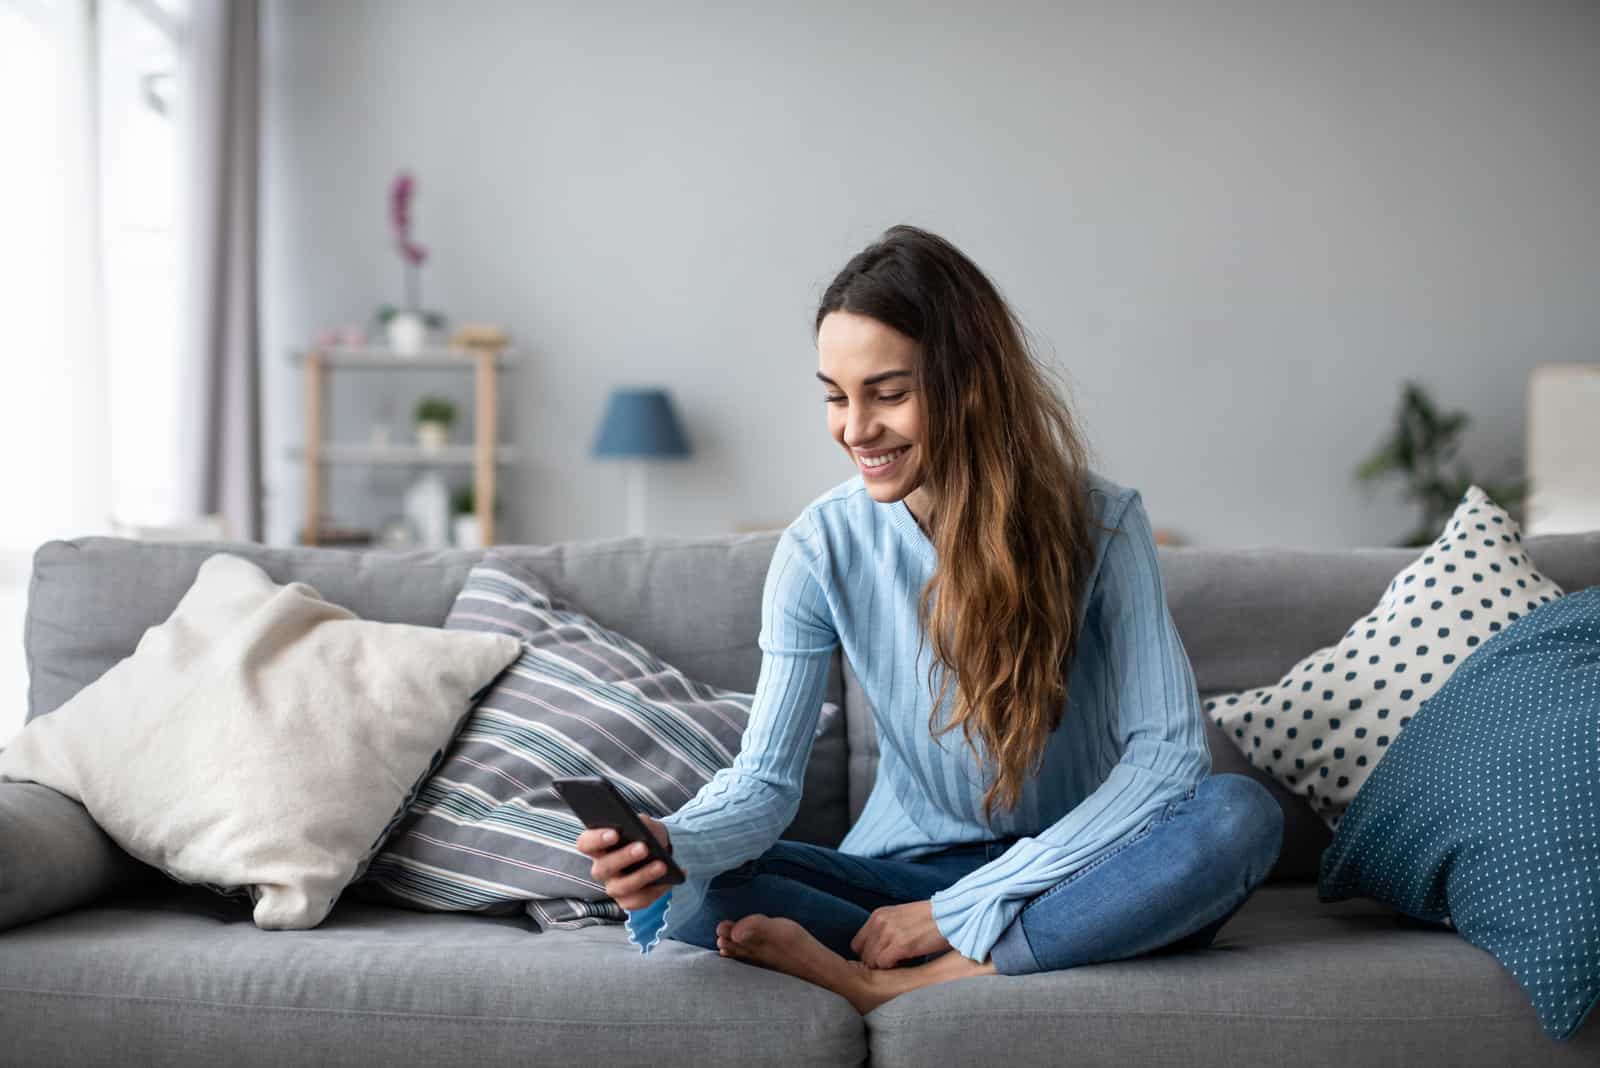 a smiling woman with long brown hair sits on the couch and keys on the phone